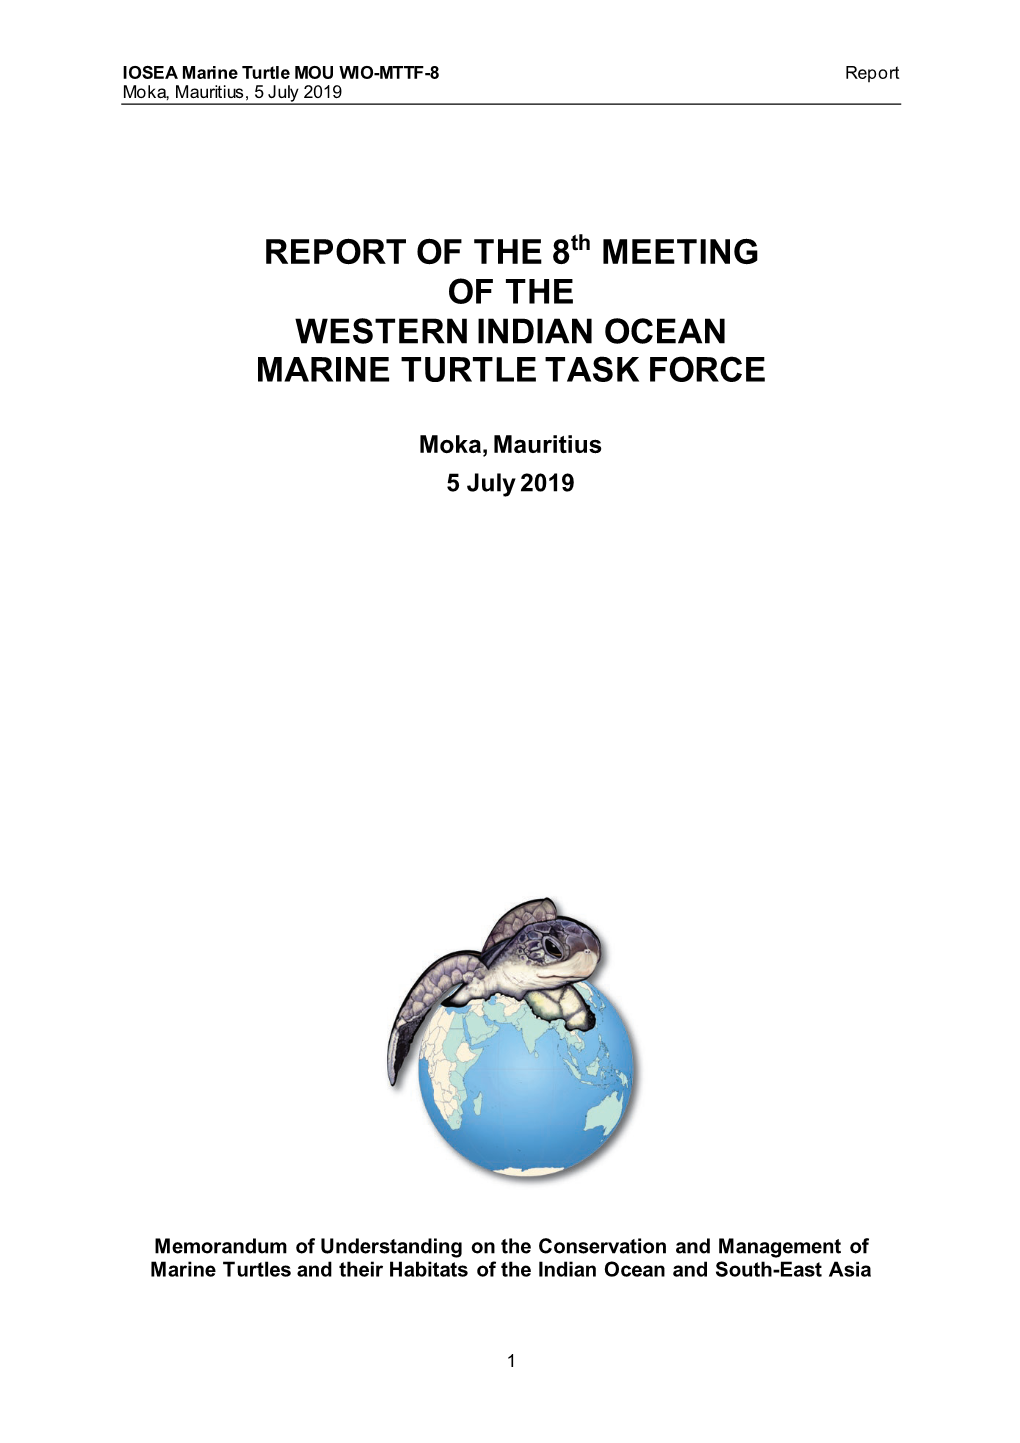 REPORT of the 8Th MEETING of the WESTERN INDIAN OCEAN MARINE TURTLE TASK FORCE